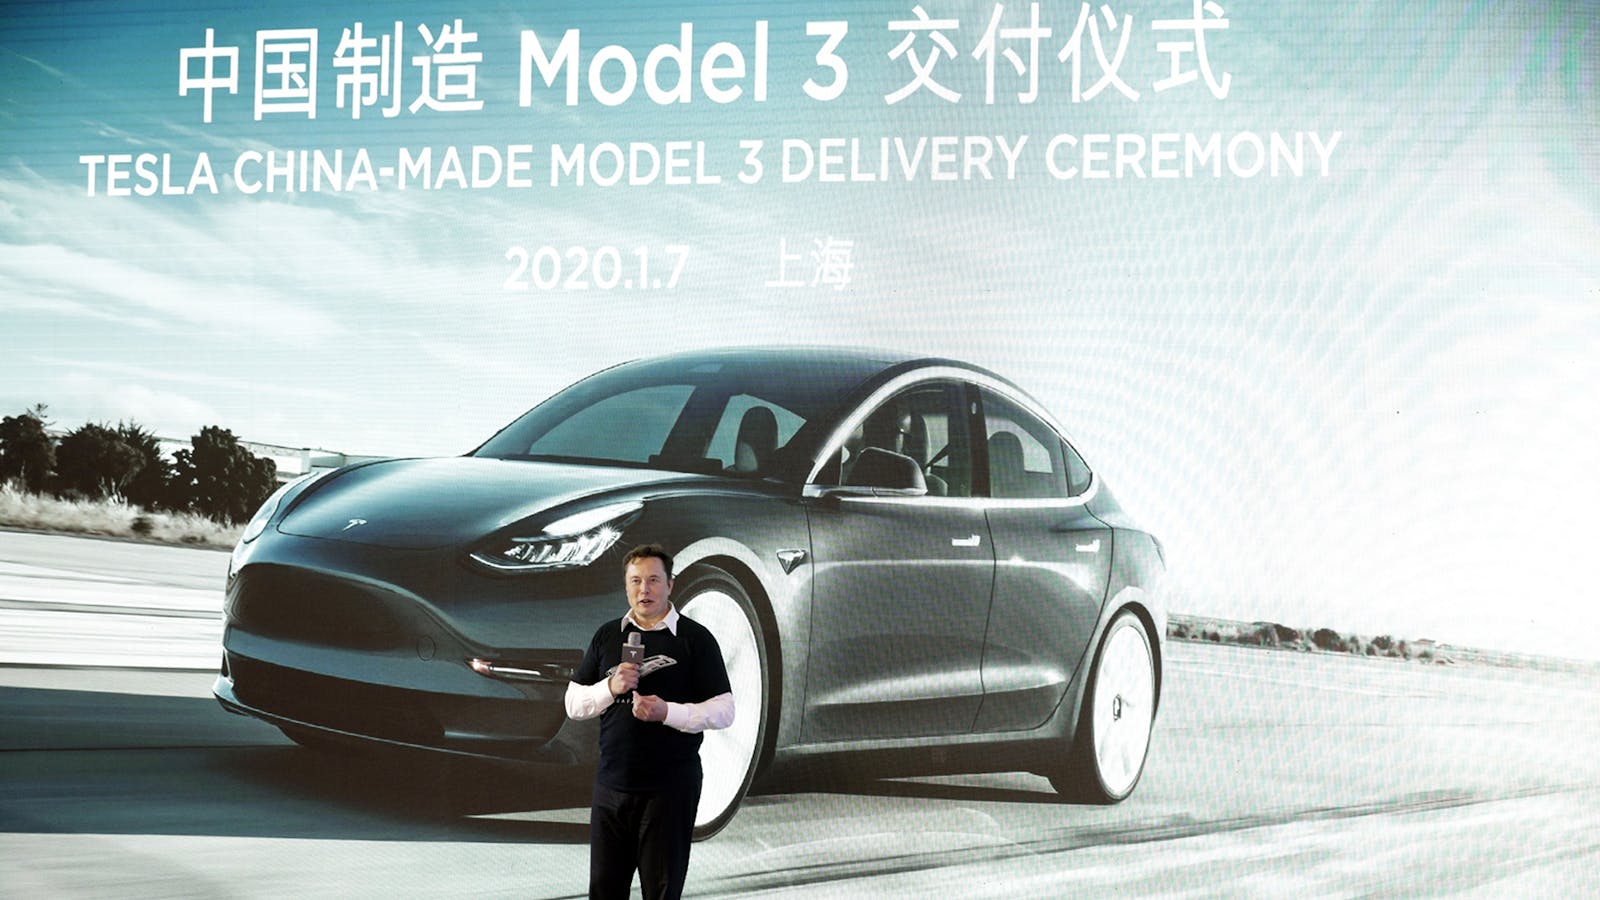 Elon Musk speaks during the Tesla China-Made Model 3 Delivery Ceremony at the company's Gigafactory in Shanghai, China, in January 2020. Photo by Bloomberg.